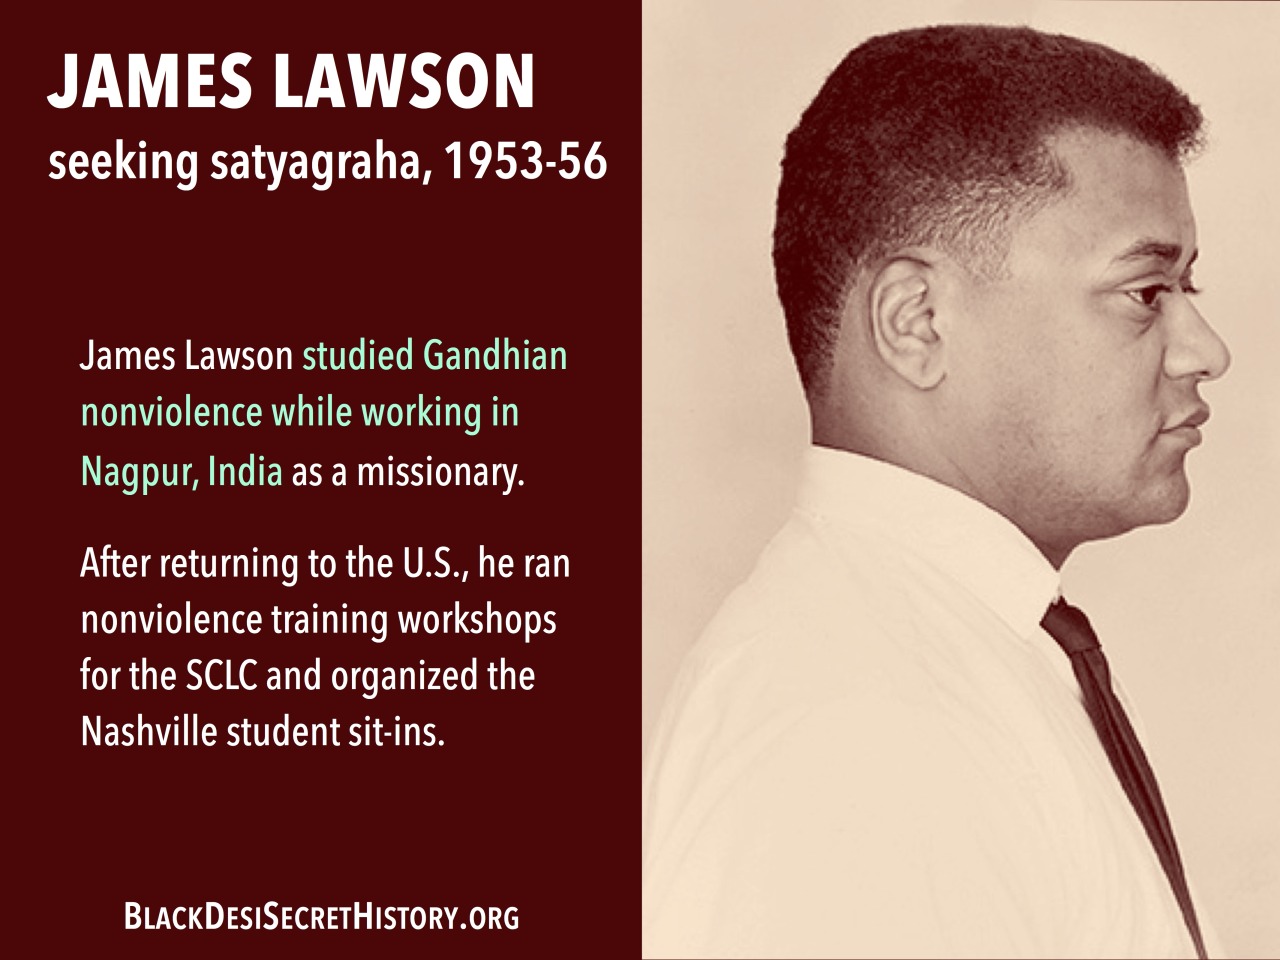 JAMES LAWSON, seeking satyagraha, 1953-56: James Lawson studied Gandhian nonviolence while working in Nagpur, India as a missionary. After returning to the U.S., he ran nonviolence training workshops for the SCLC and organized the Nashville student sit-ins.